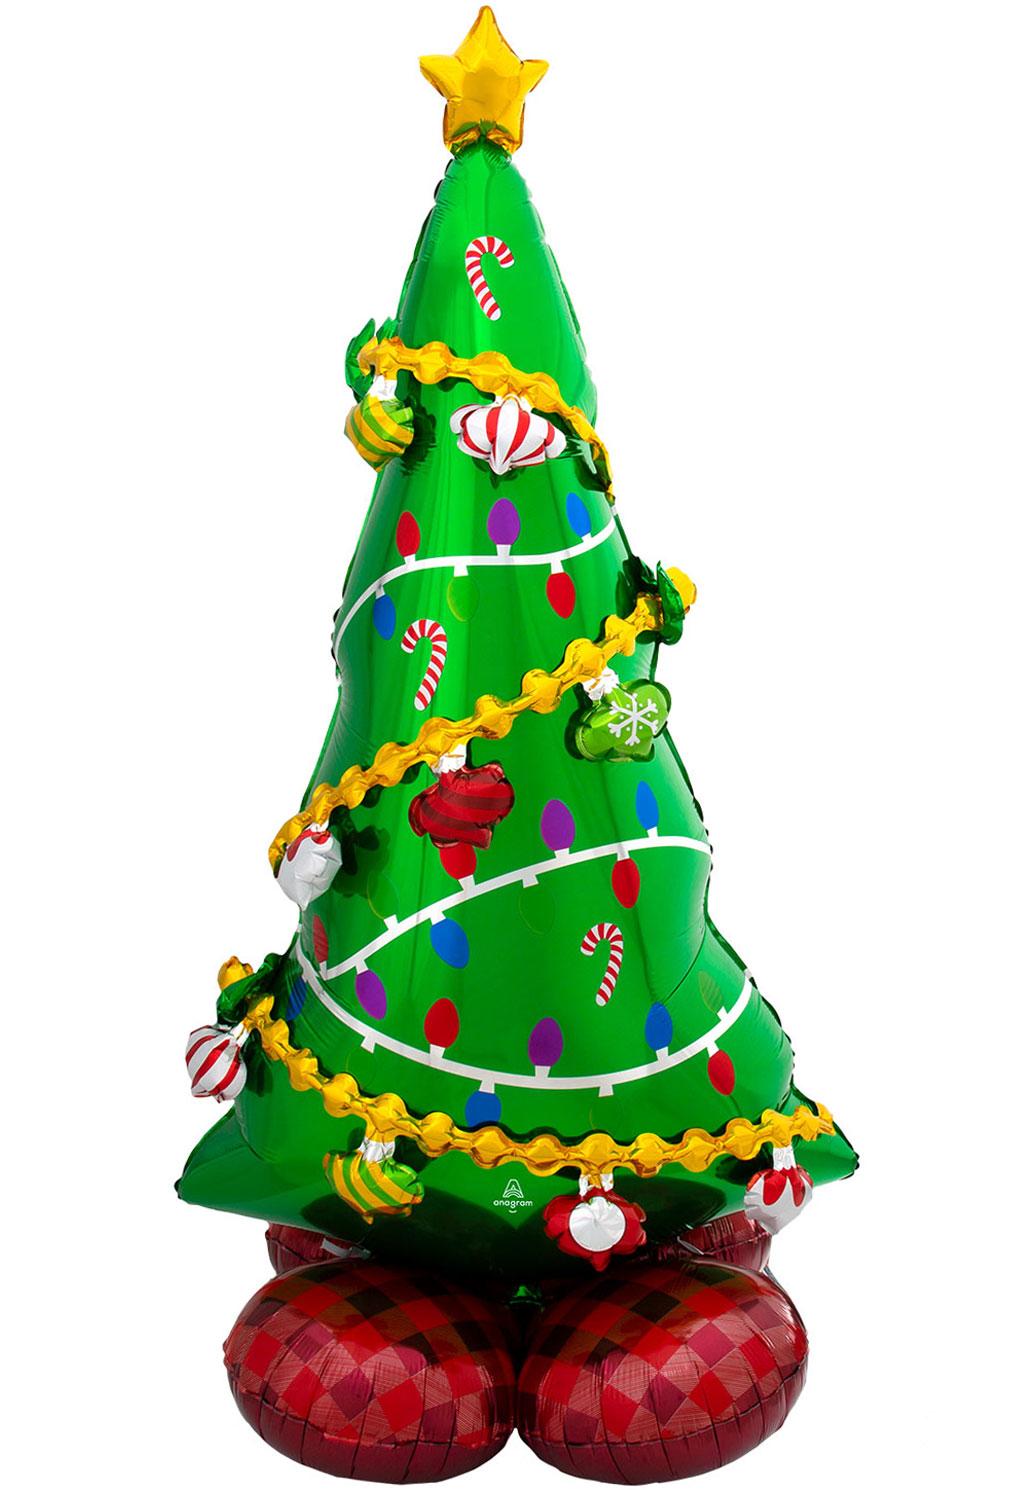 AirLoonz: Christmas Tree Air-Fill Character Balloon 59" tall by Amscan 8311711 available here at Karnival Costumes online party shop